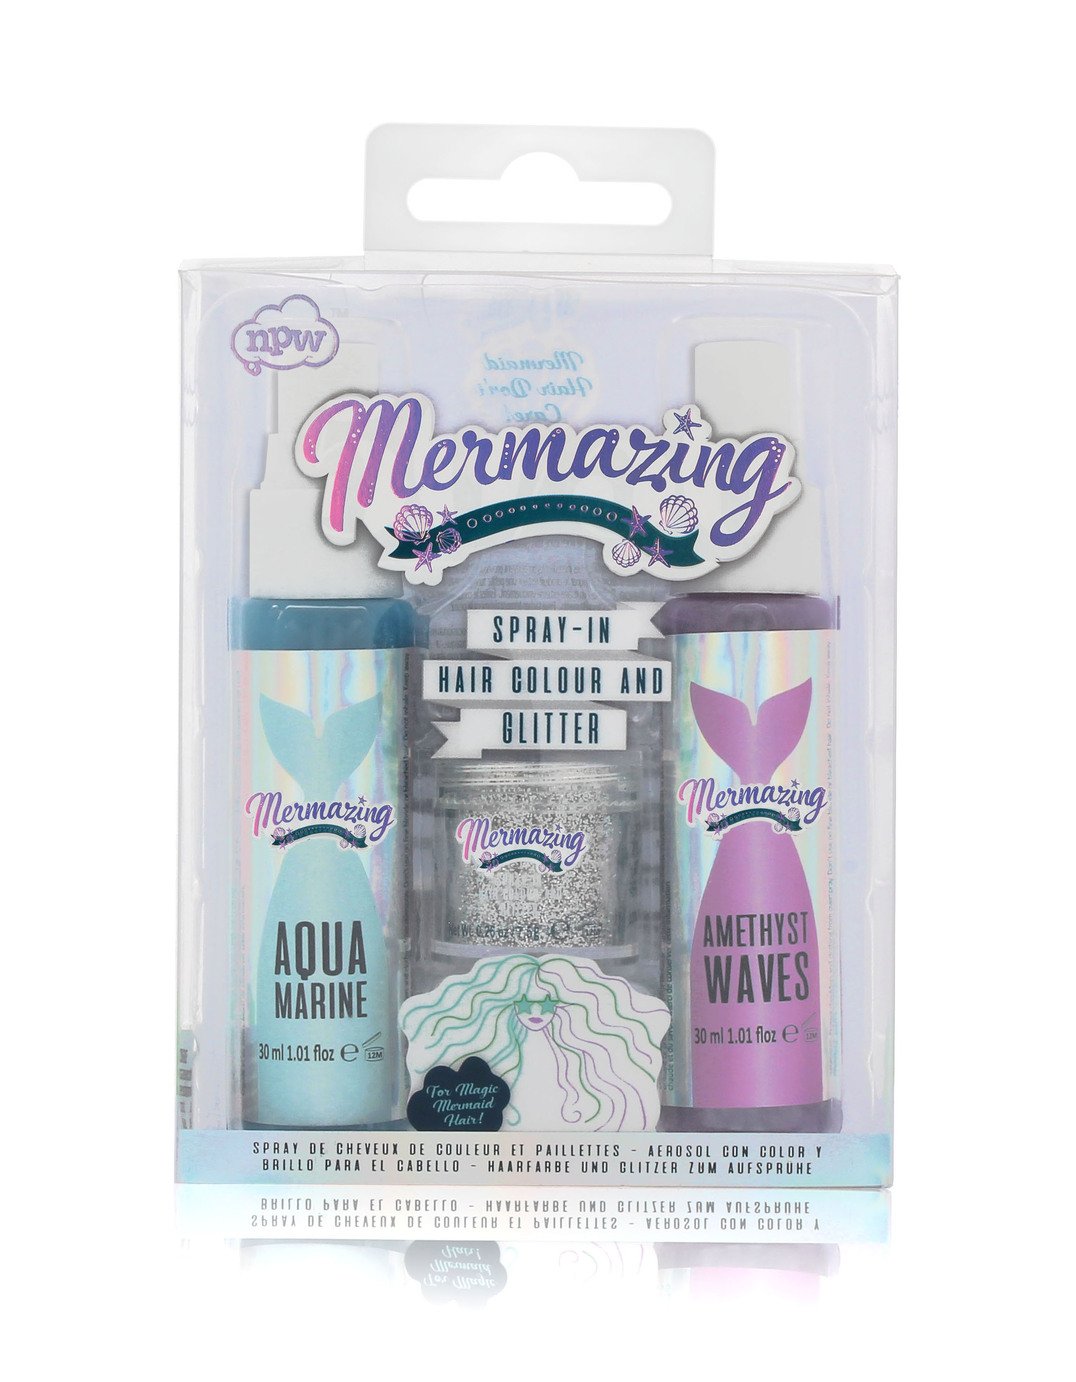 NPW Mermaid Spray-In Hair Duo with Glitter